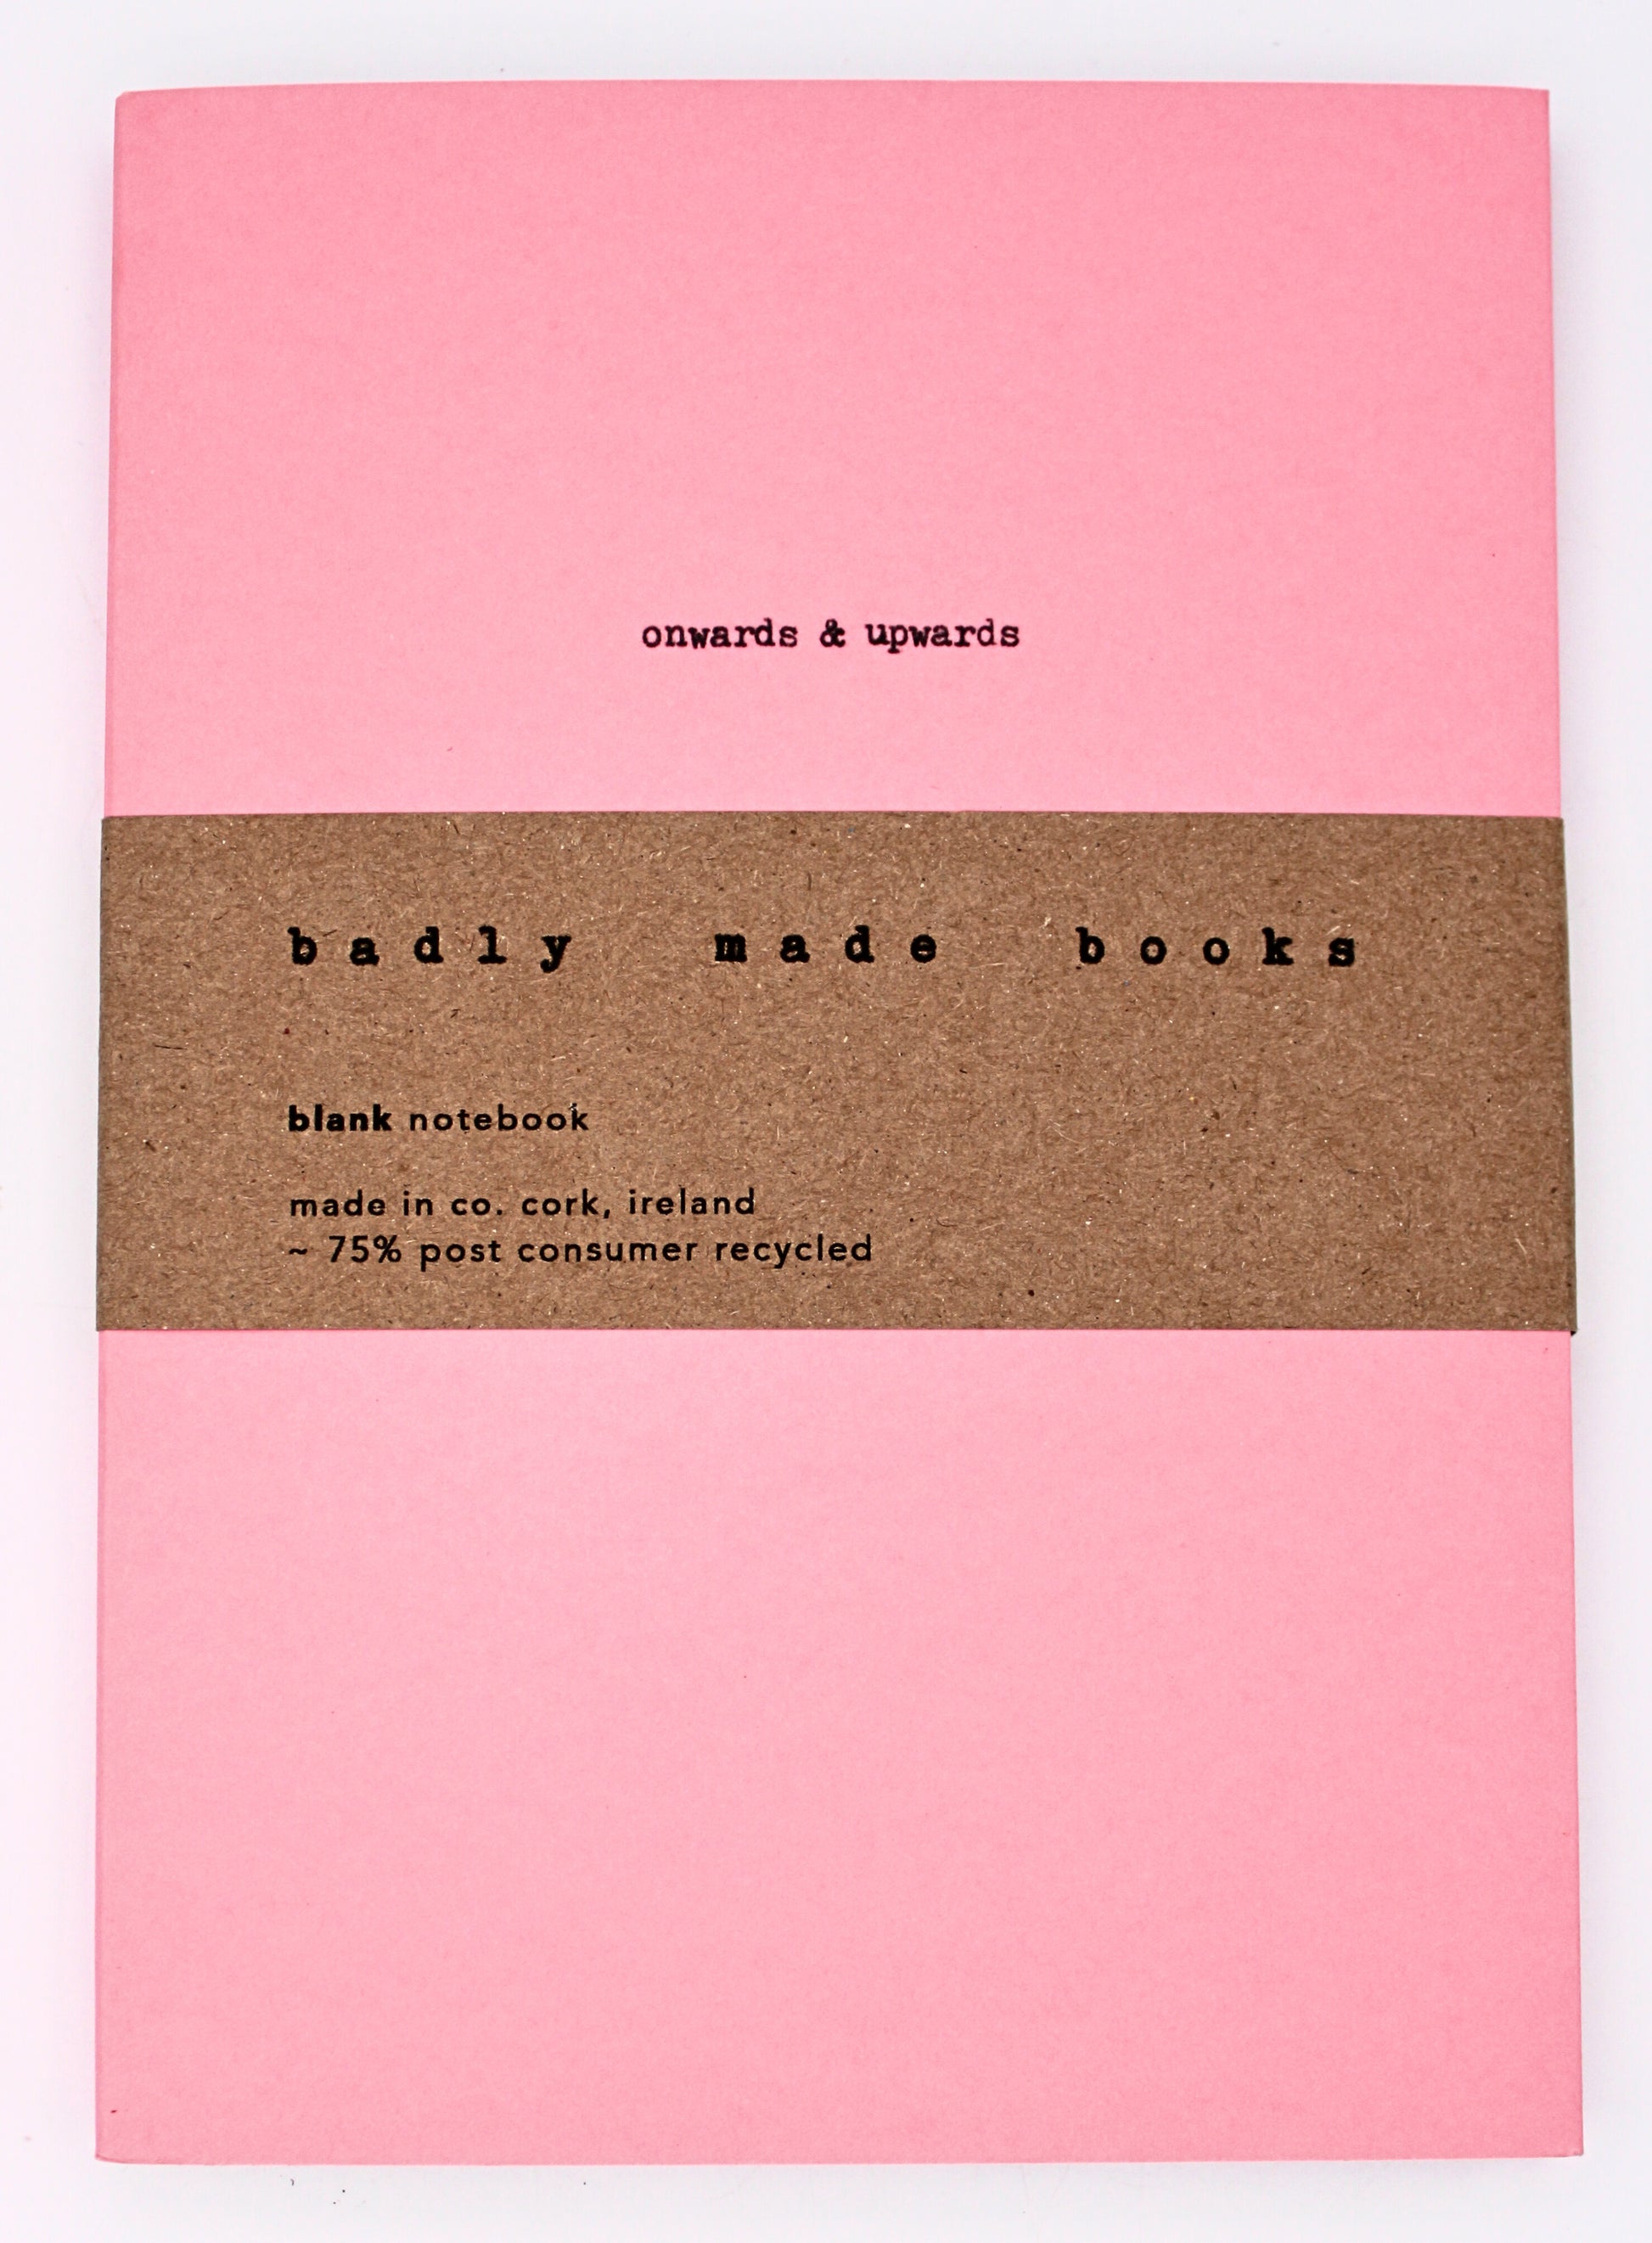 Badly Made Books A5 Blank Notebook in Pink